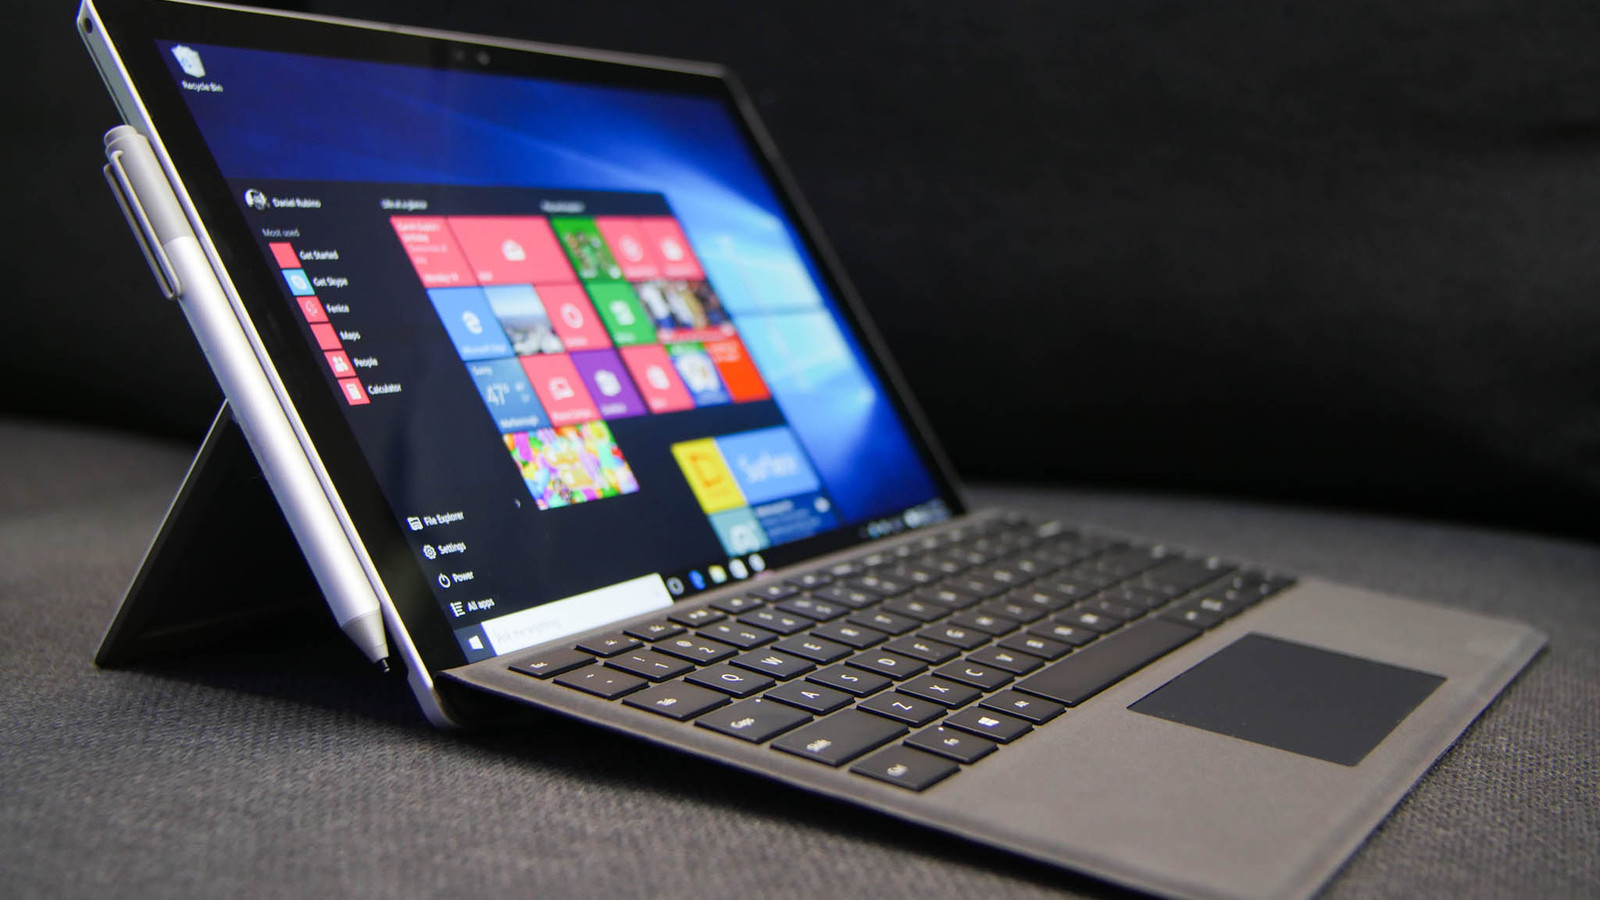 National Security Agency greenlights Microsoft Surface tablets for top secret government use